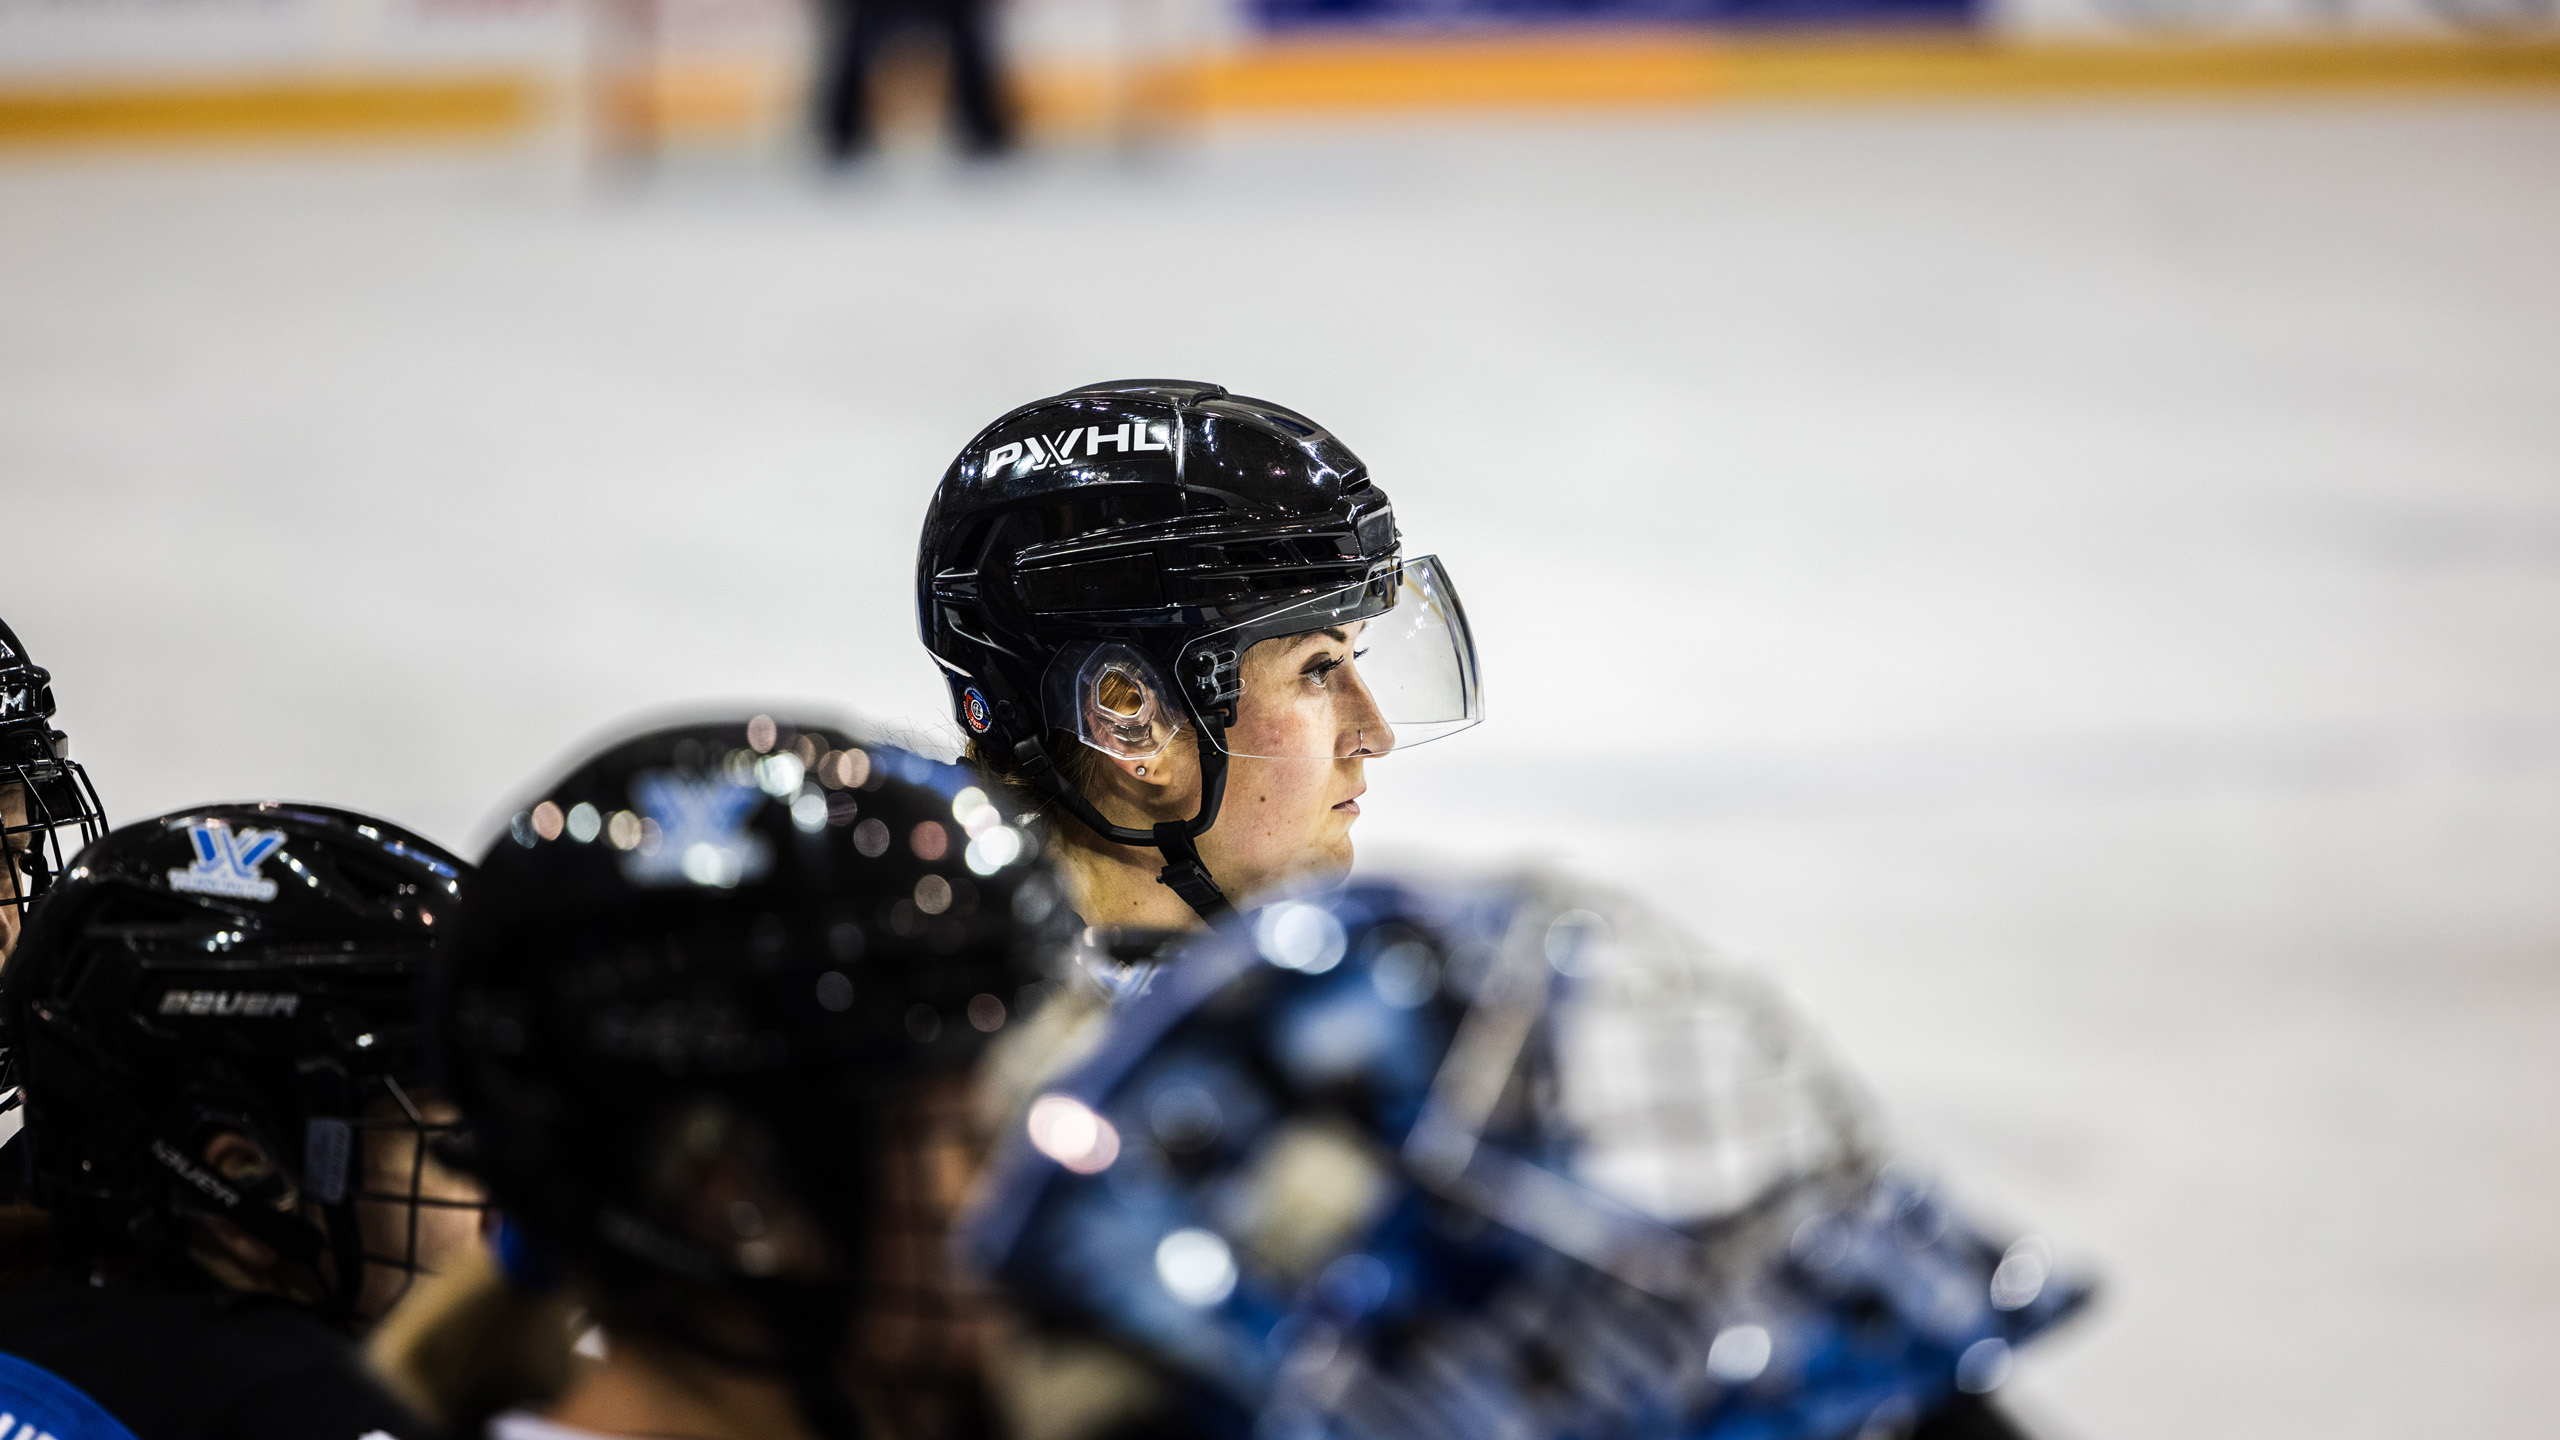 PWHL Toronto player stares at the ice